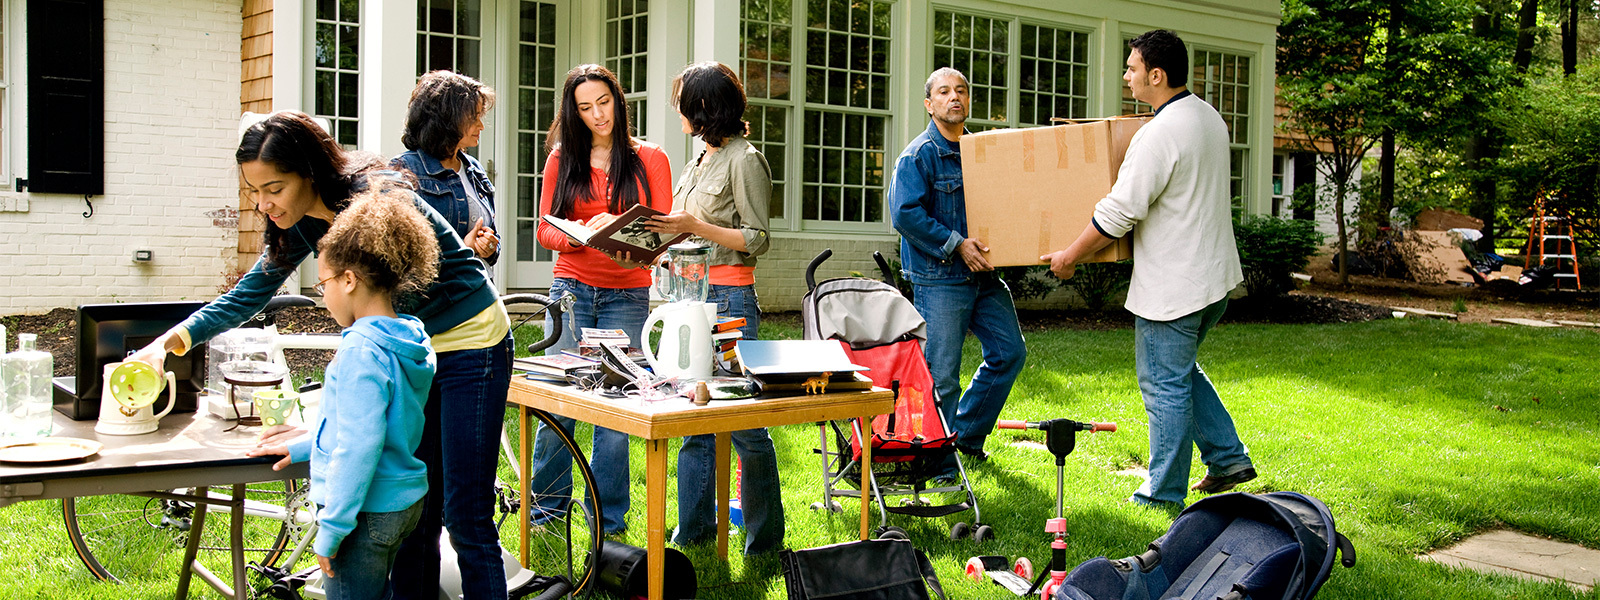 People shopping at a yard sale that can help reduce moving costs